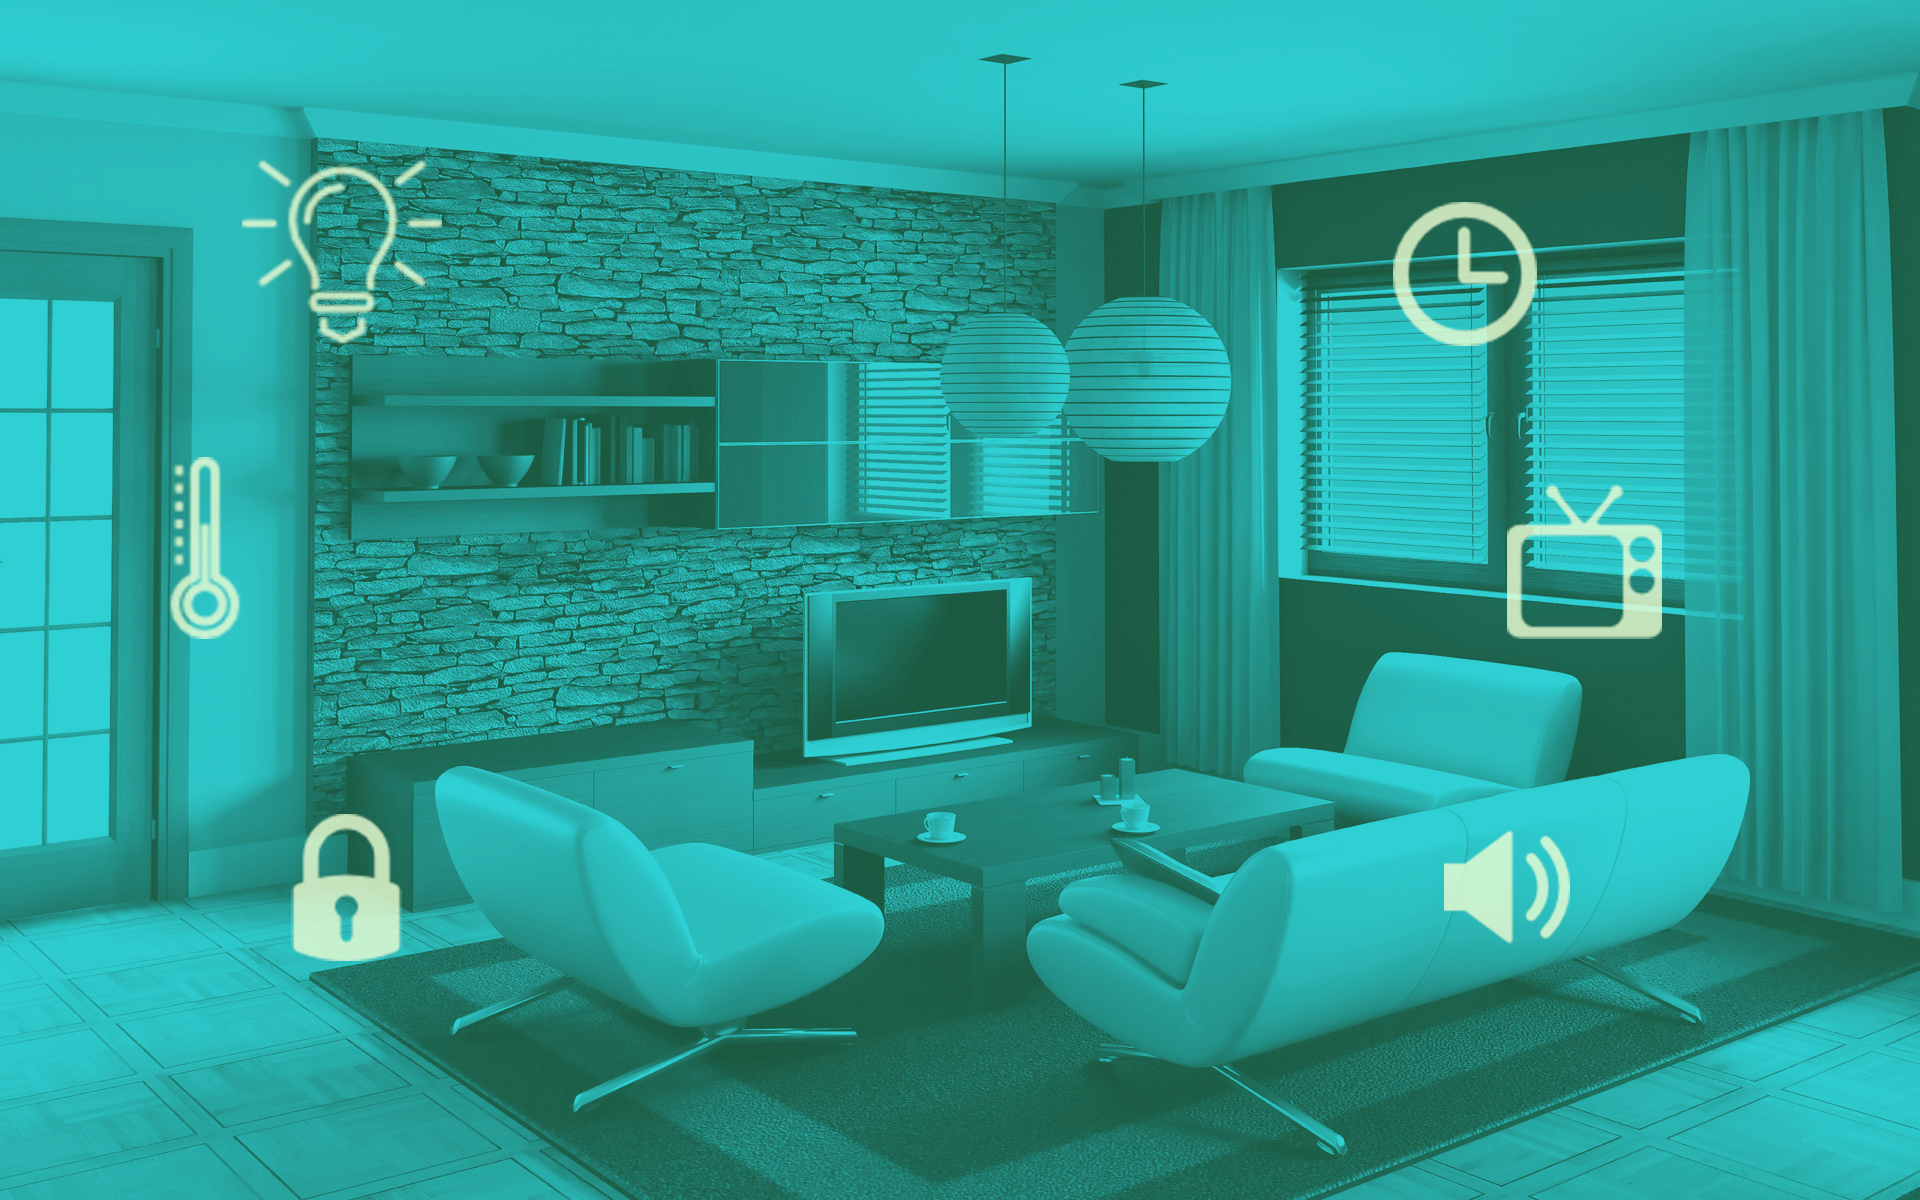 Home Automation Ideas With Iot Based Mobile Applications Smart